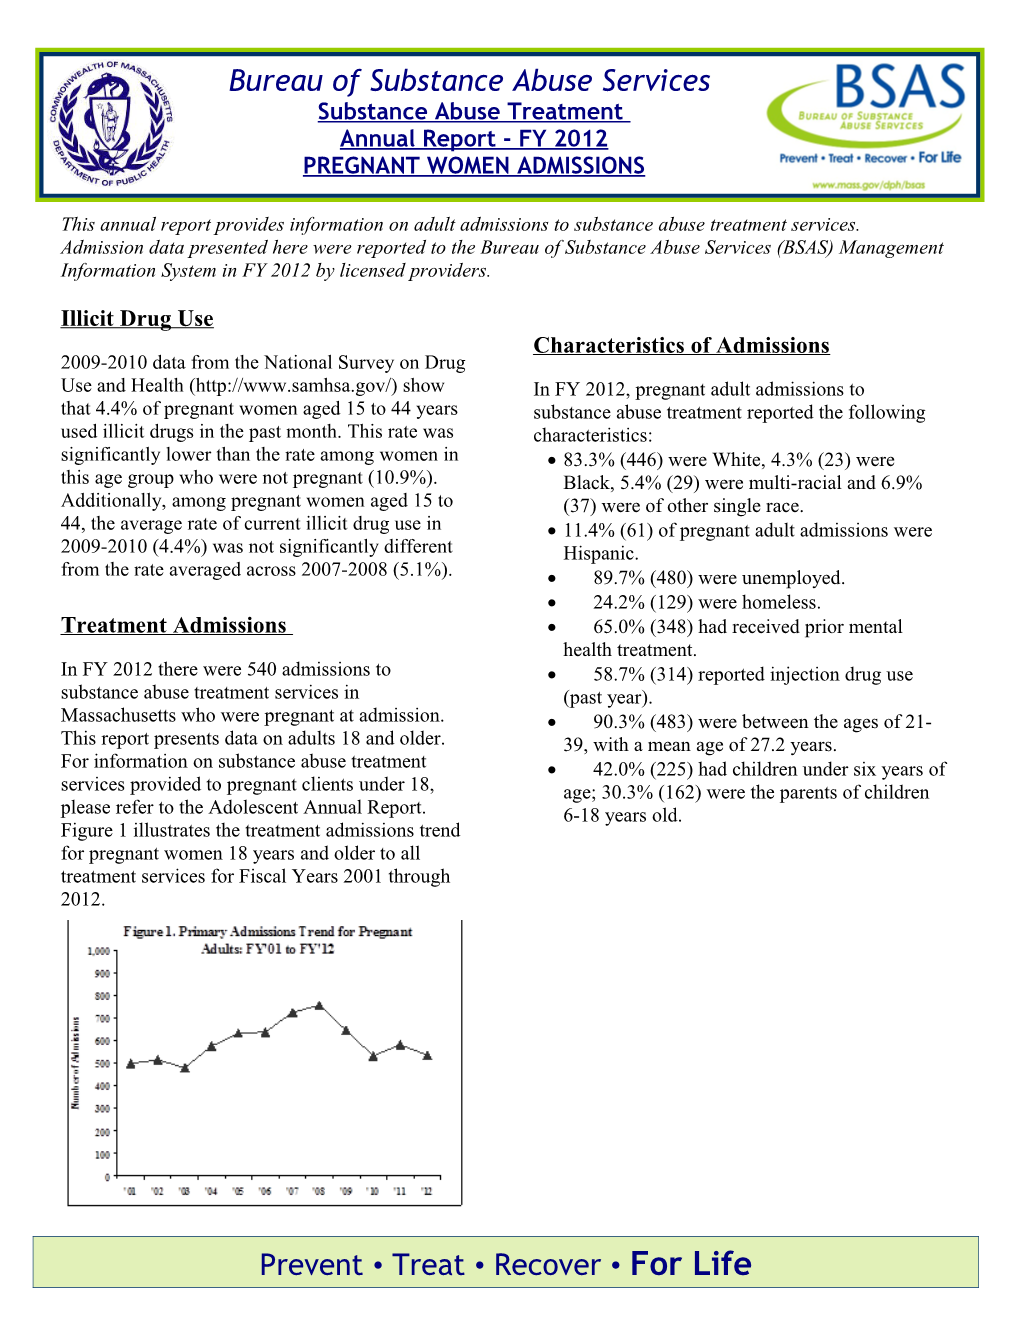 Statewide Substance Abuse Fact Sheet